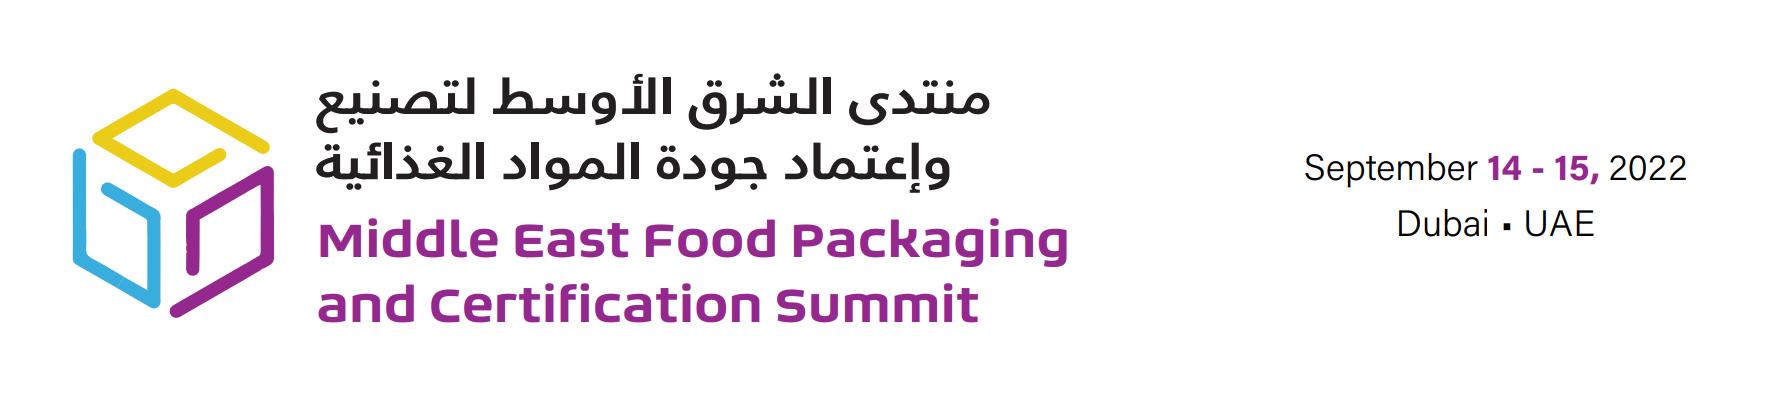 Middle East Food Packaging and Certification Summit 